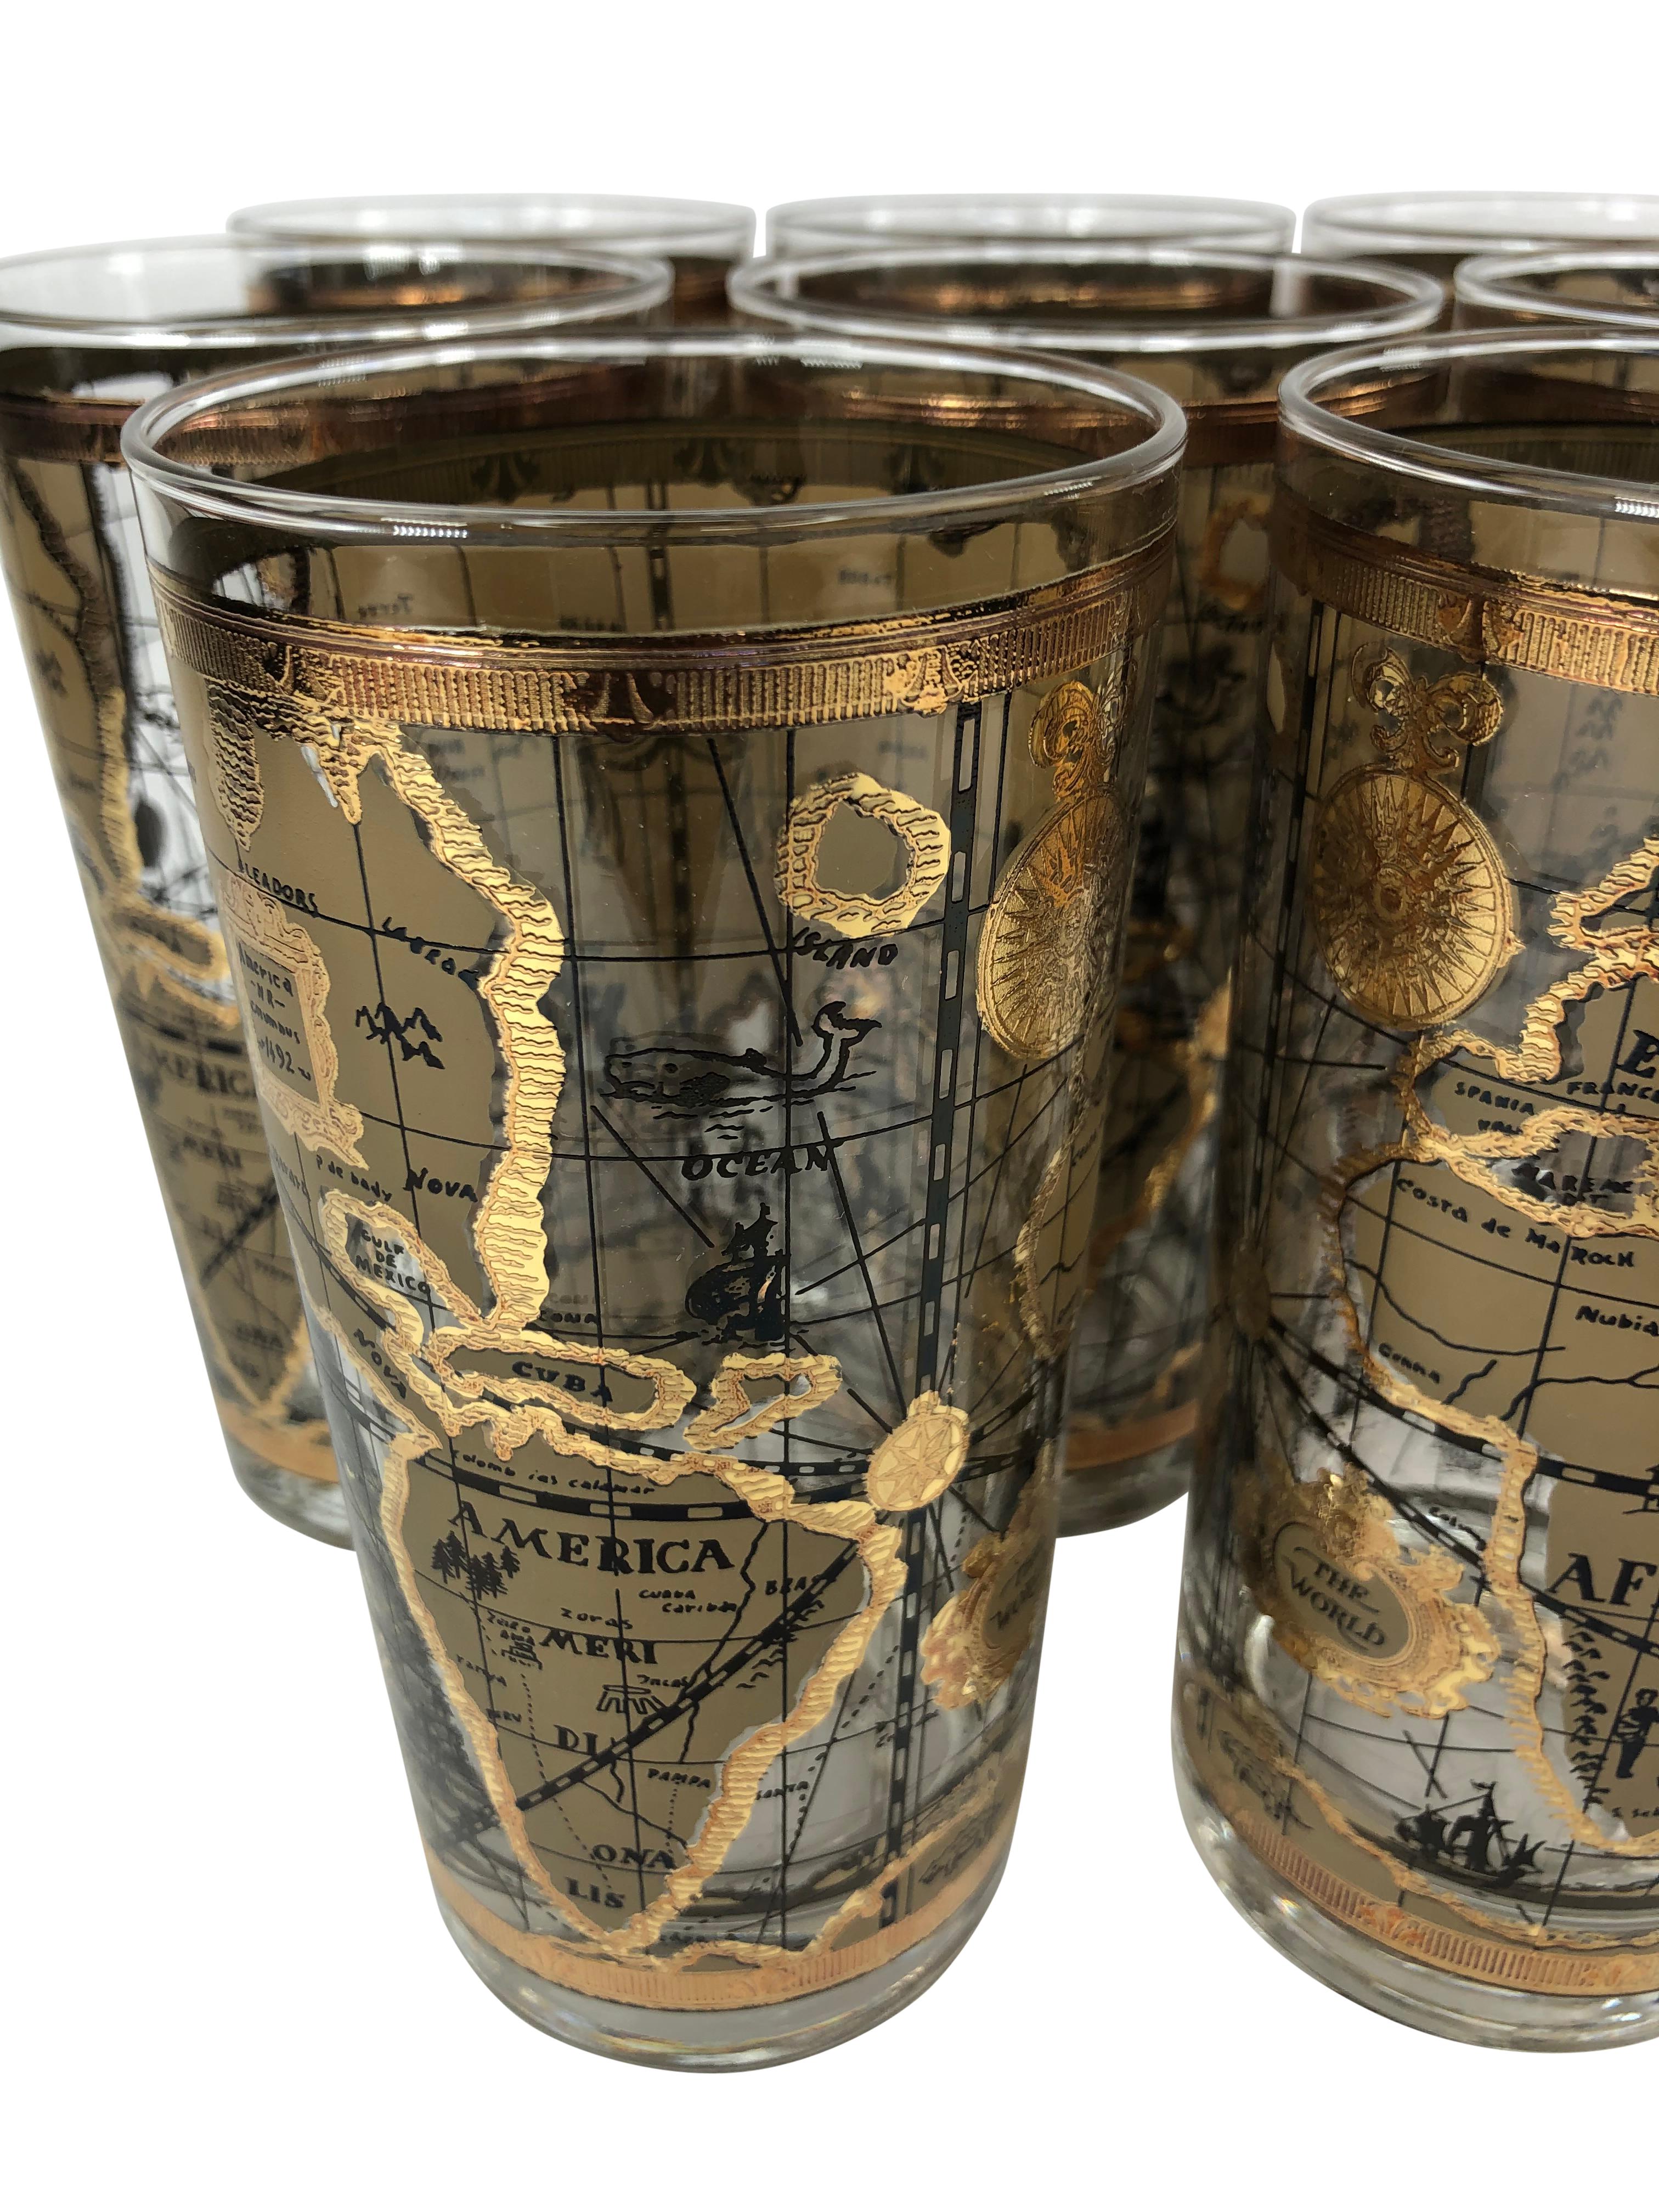 Vintage Cera Glass Highball Glasses With Old World Maps - Set of 8 In Good Condition For Sale In Chapel Hill, NC